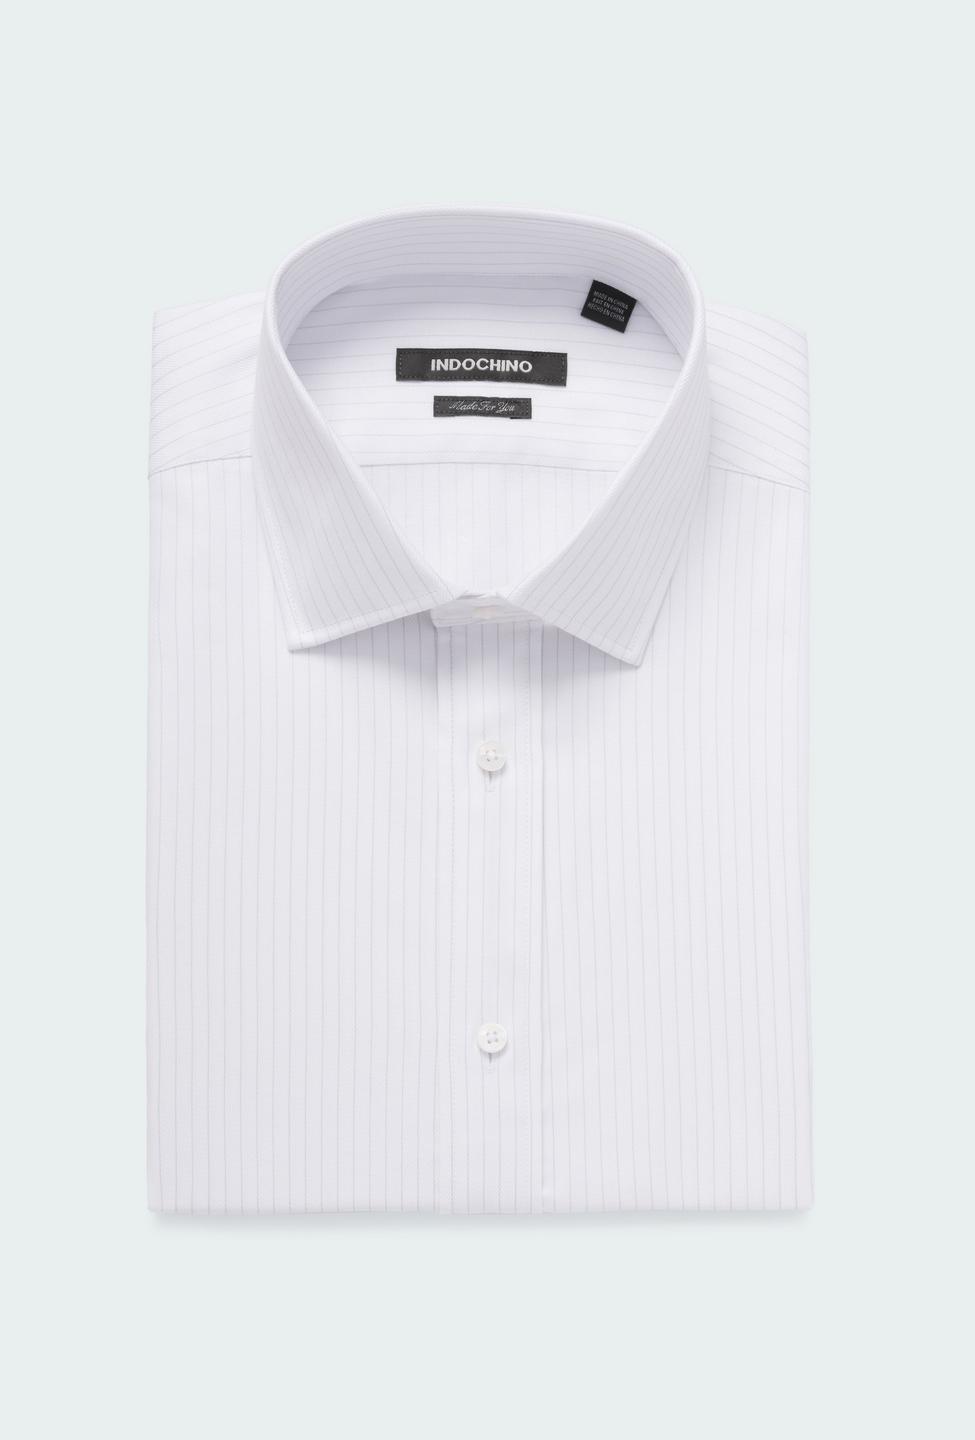 Gray shirt - Striped Design from Seasonal Indochino Collection